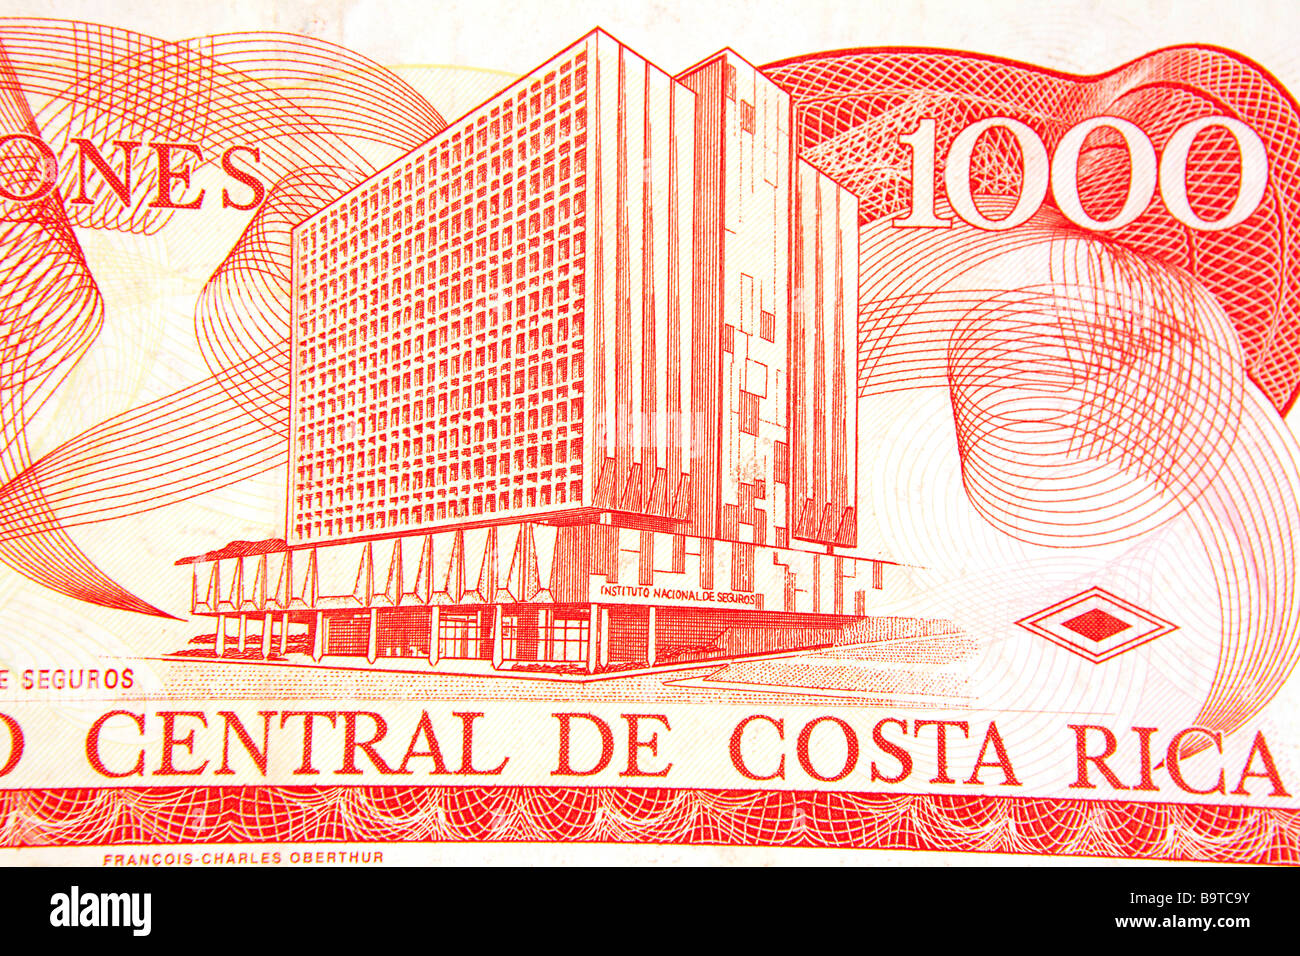 Money currency detail of 1000 Colones Costa Rican banknote Stock Photo